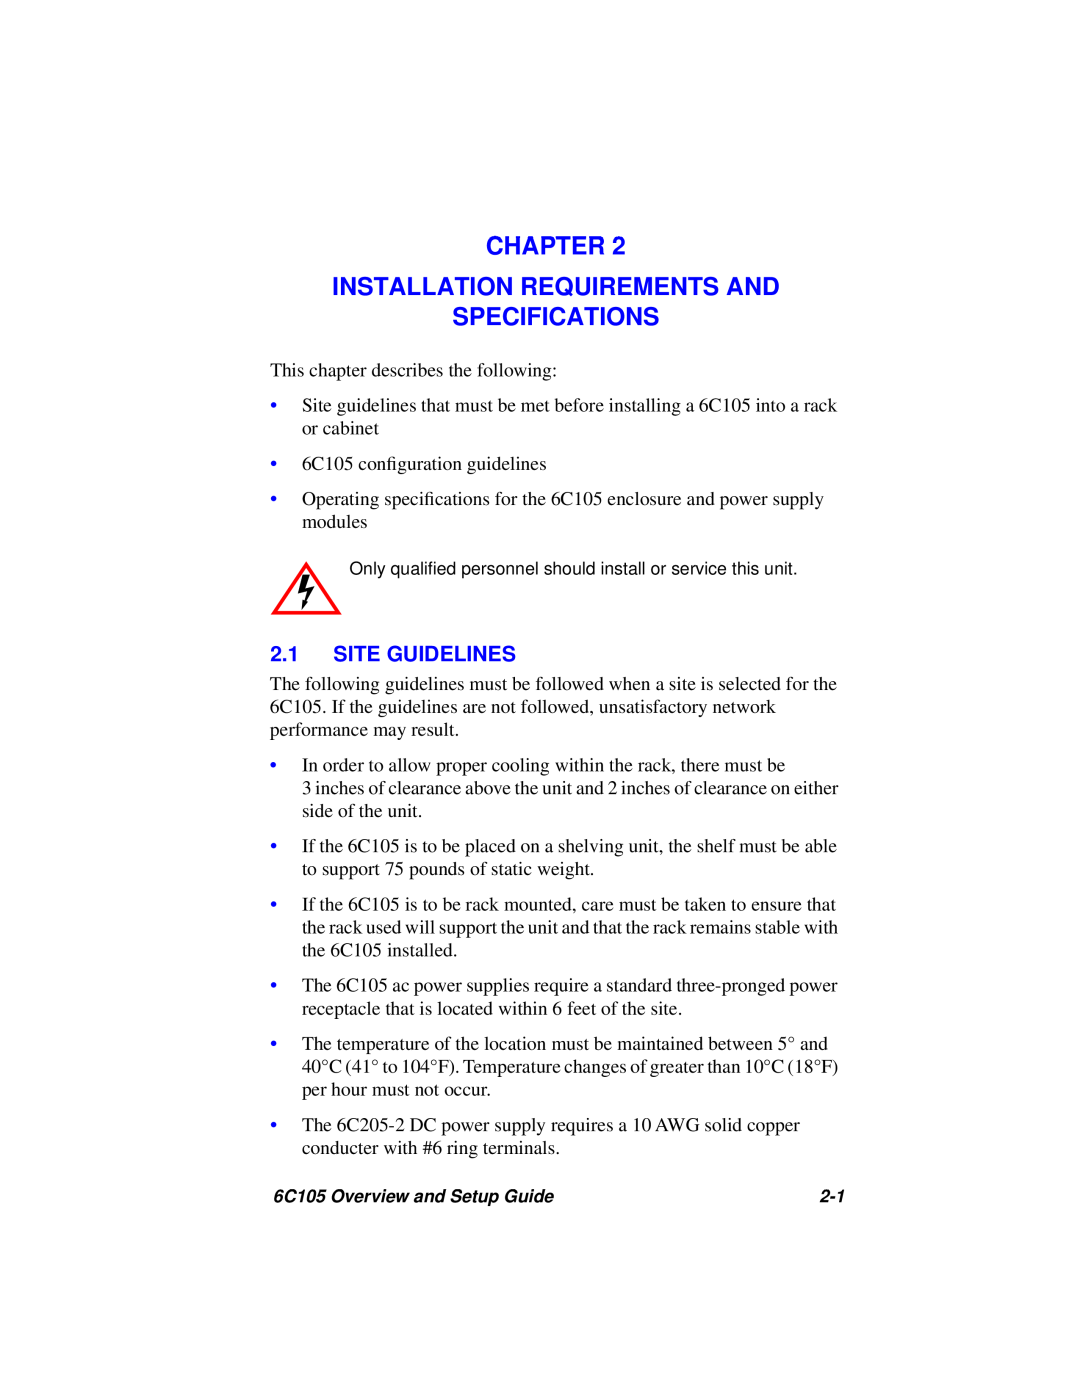 Cabletron Systems 6C105 setup guide Chapter Installation Requirements And Specifications, Site Guidelines 